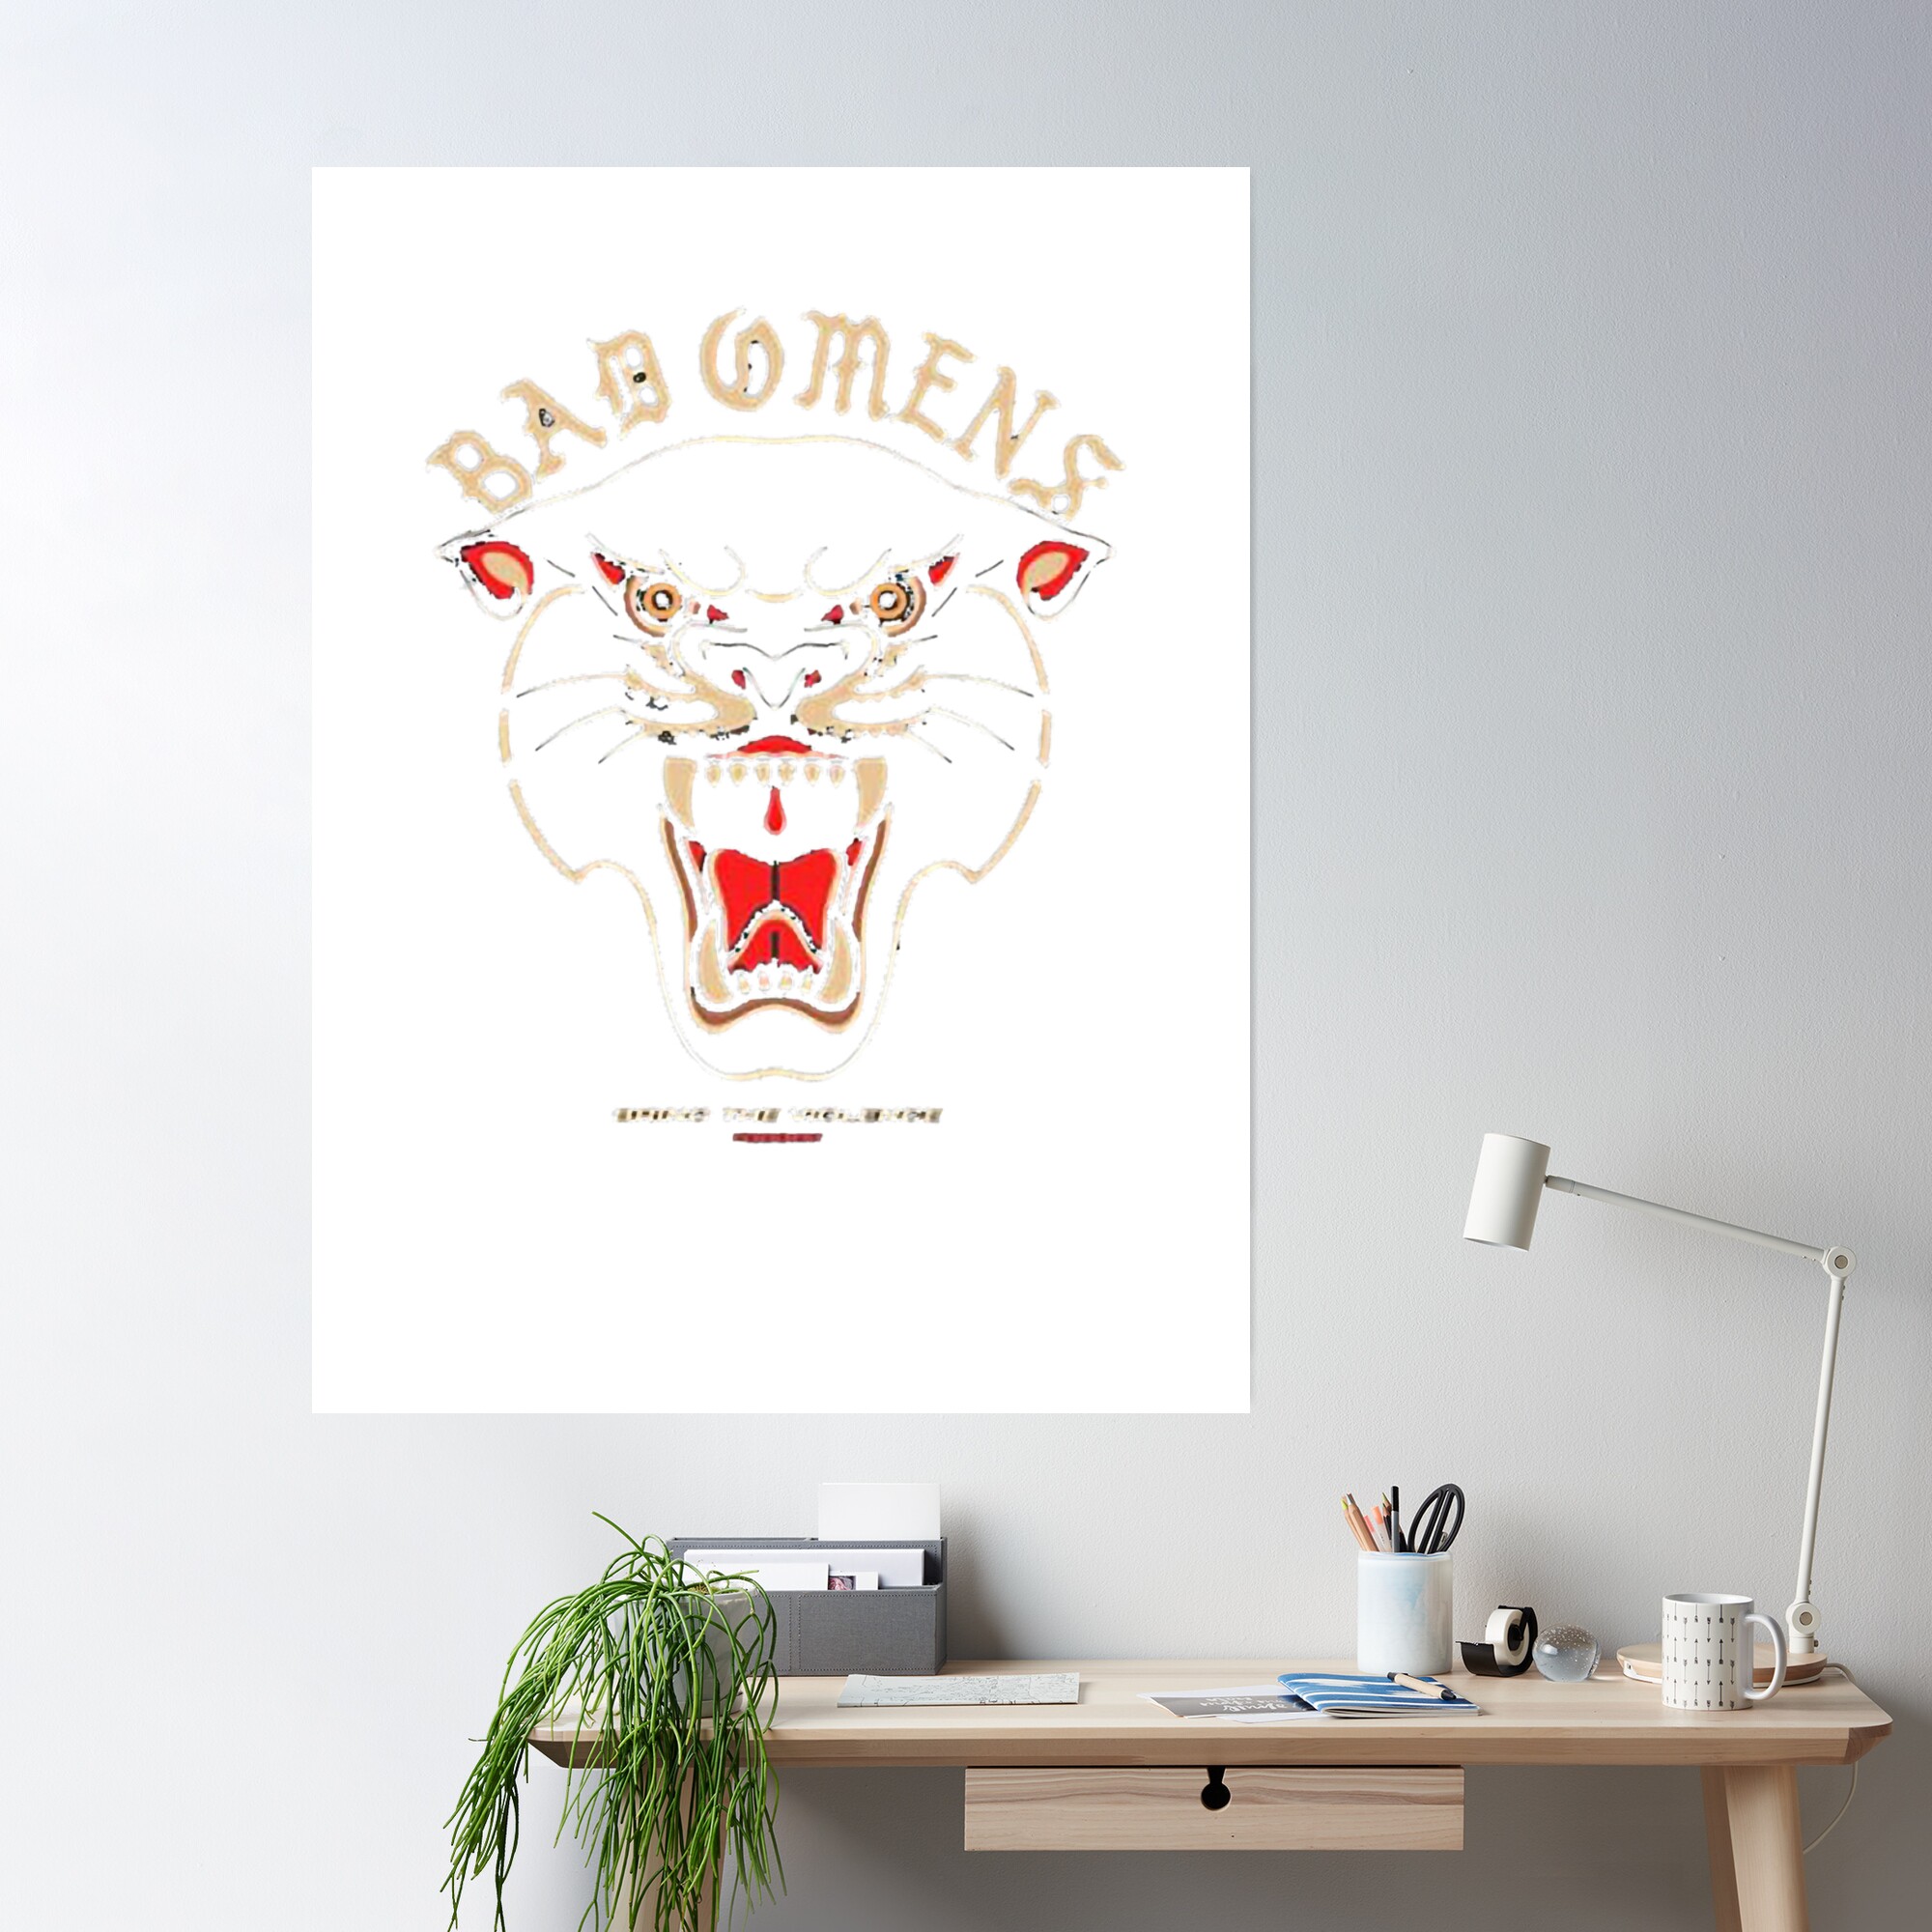 cposterlargesquare product2000x2000 14 - Bad Omens Shop